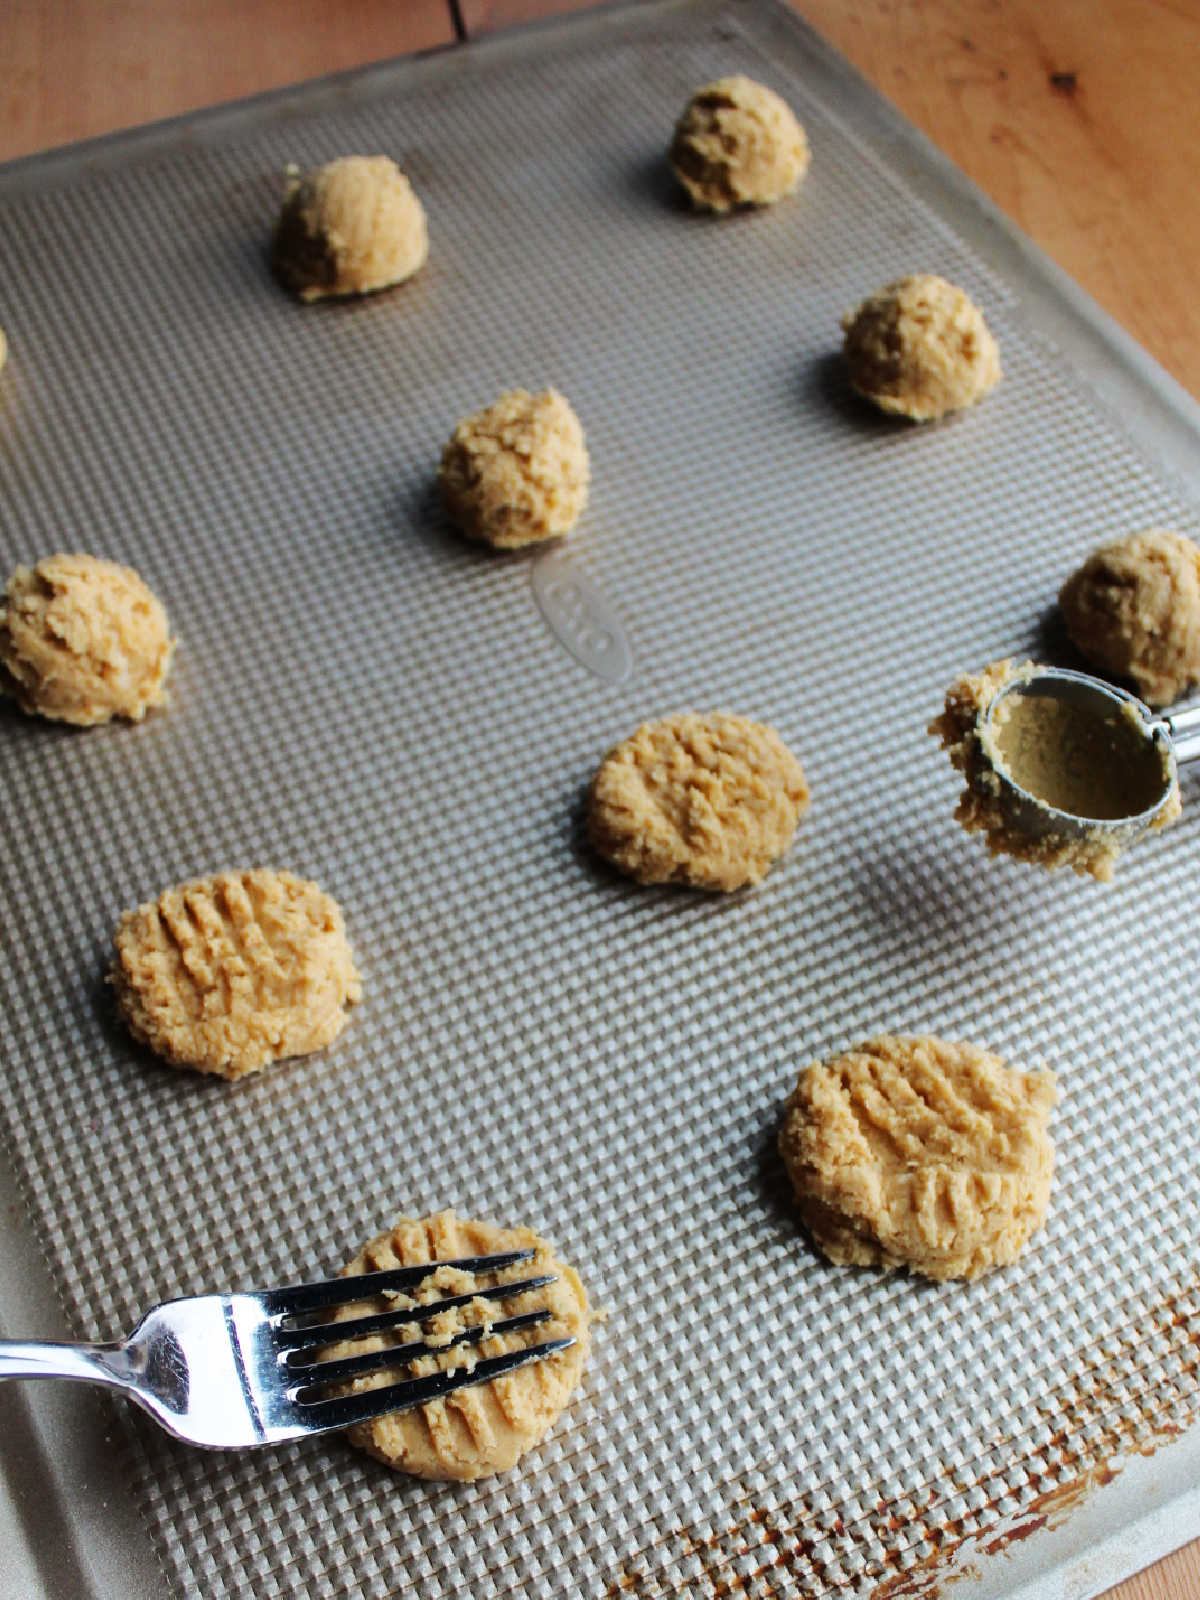 Tray of peanut butter cookies with cookie scoop nearby and a fork making the marks on the top of a ball of peanut butter cookie dough.